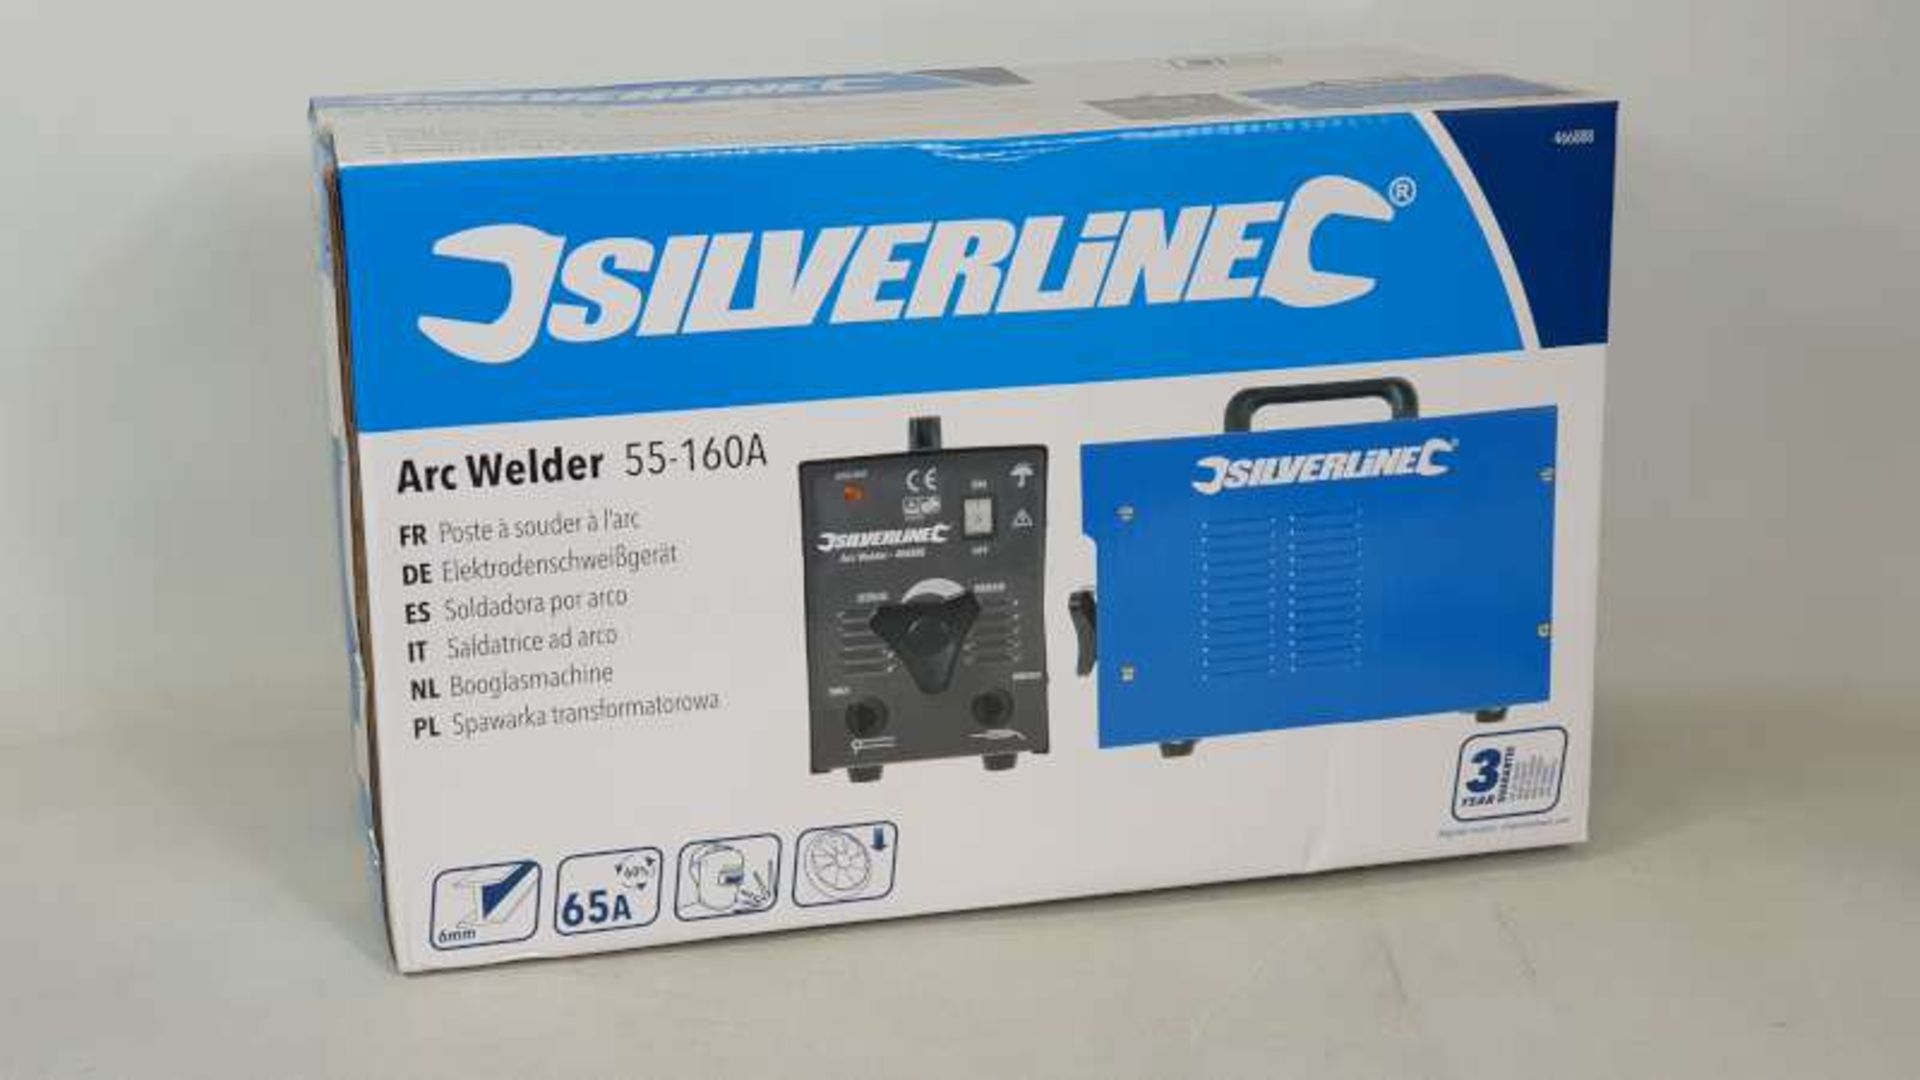 BRAND NEW BOXED SILVERLINE ARC WELDER 55-160A WITH 3 YEAR MANUFACTURERS GUARANTEE